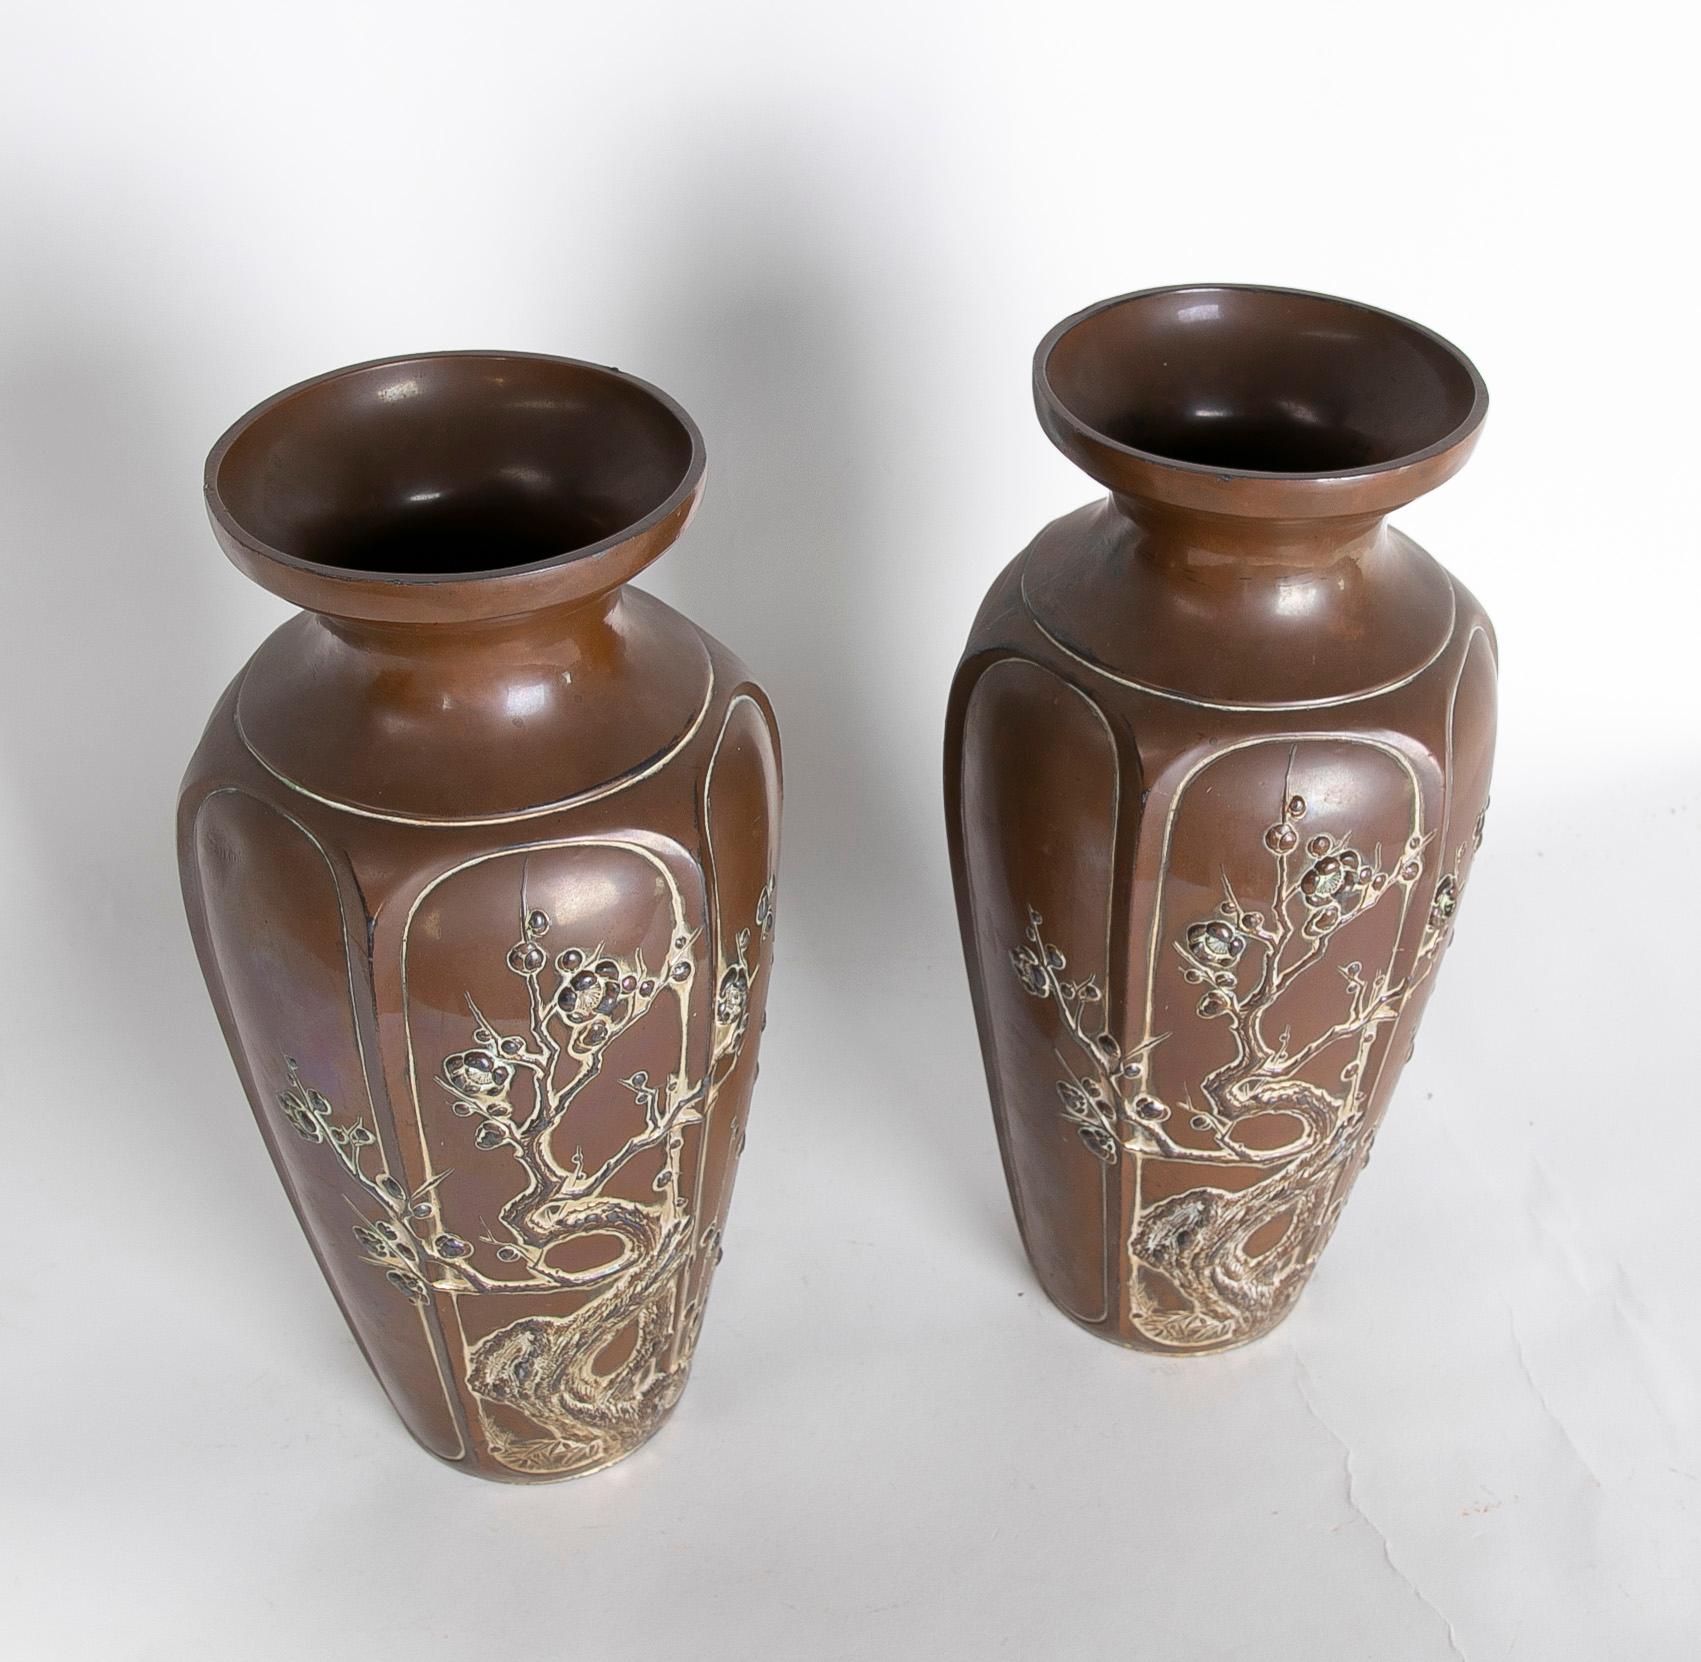 Chinese Pair of Ceramic Vases with Plants Decoration in Brown Tones In Good Condition For Sale In Marbella, ES